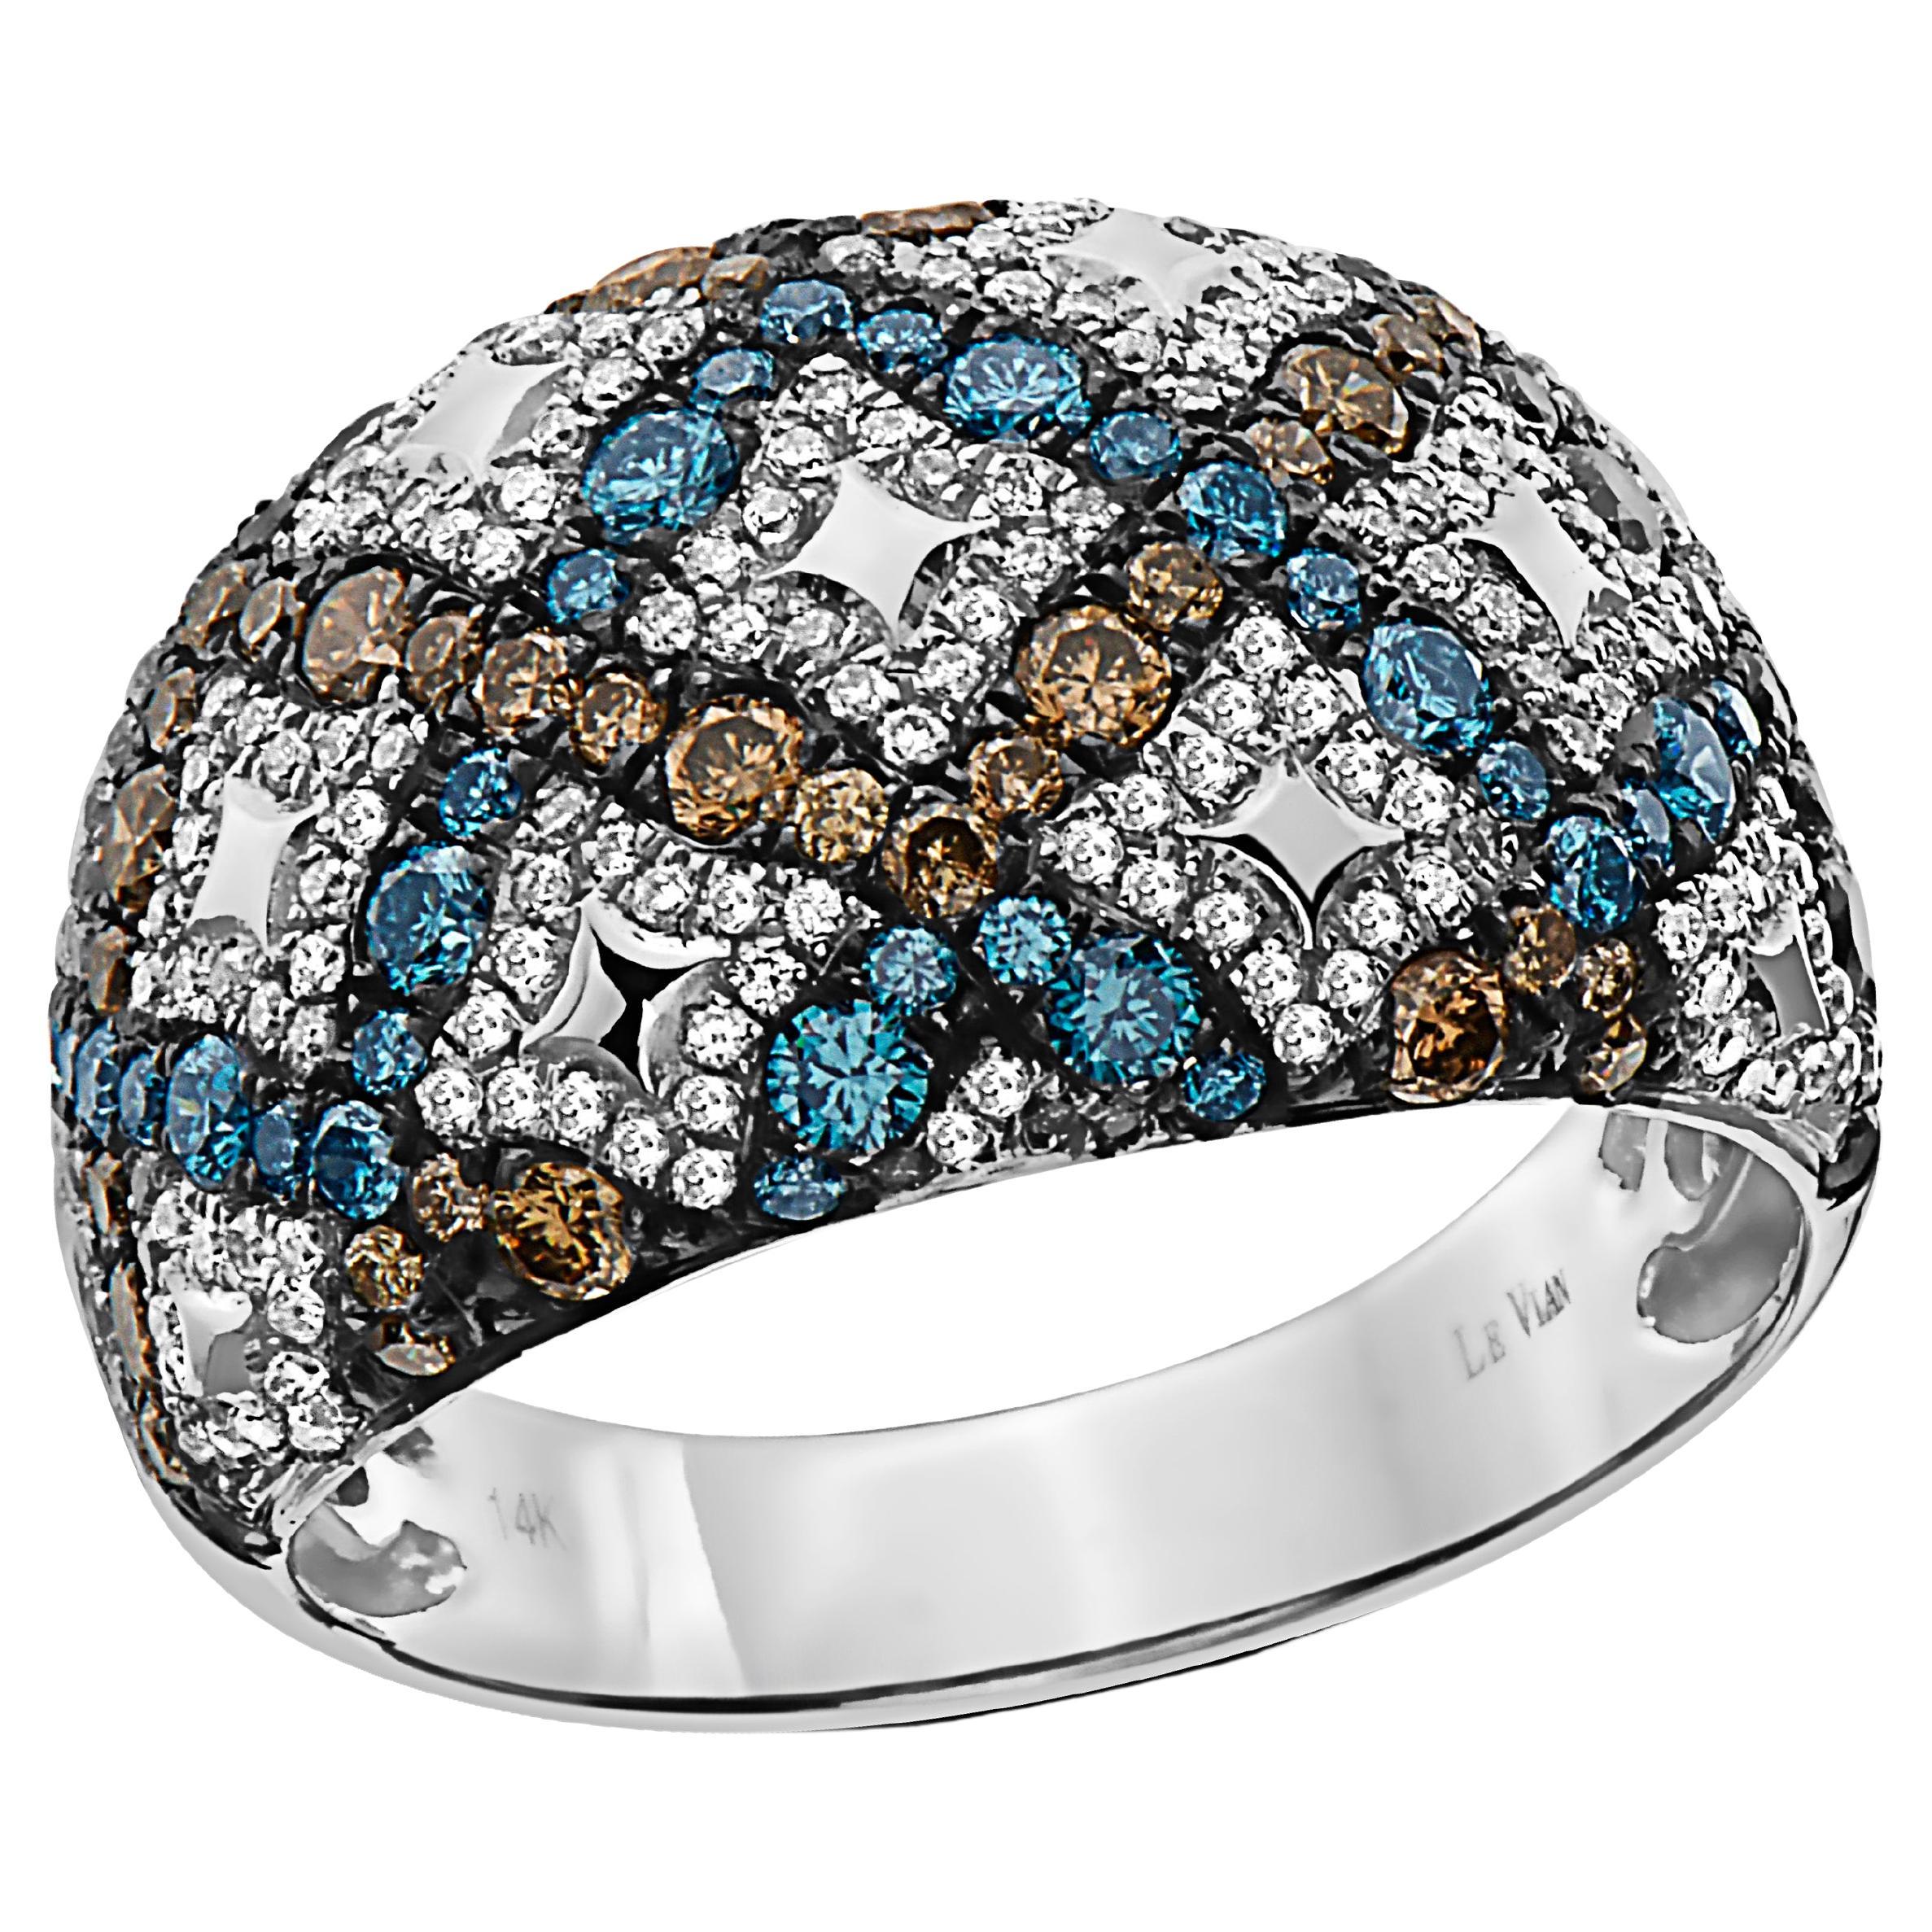 Le Vian Ring 1 1 2 Cts Blue Chocolate White Natural Diamonds in 14K White Gold For Sale